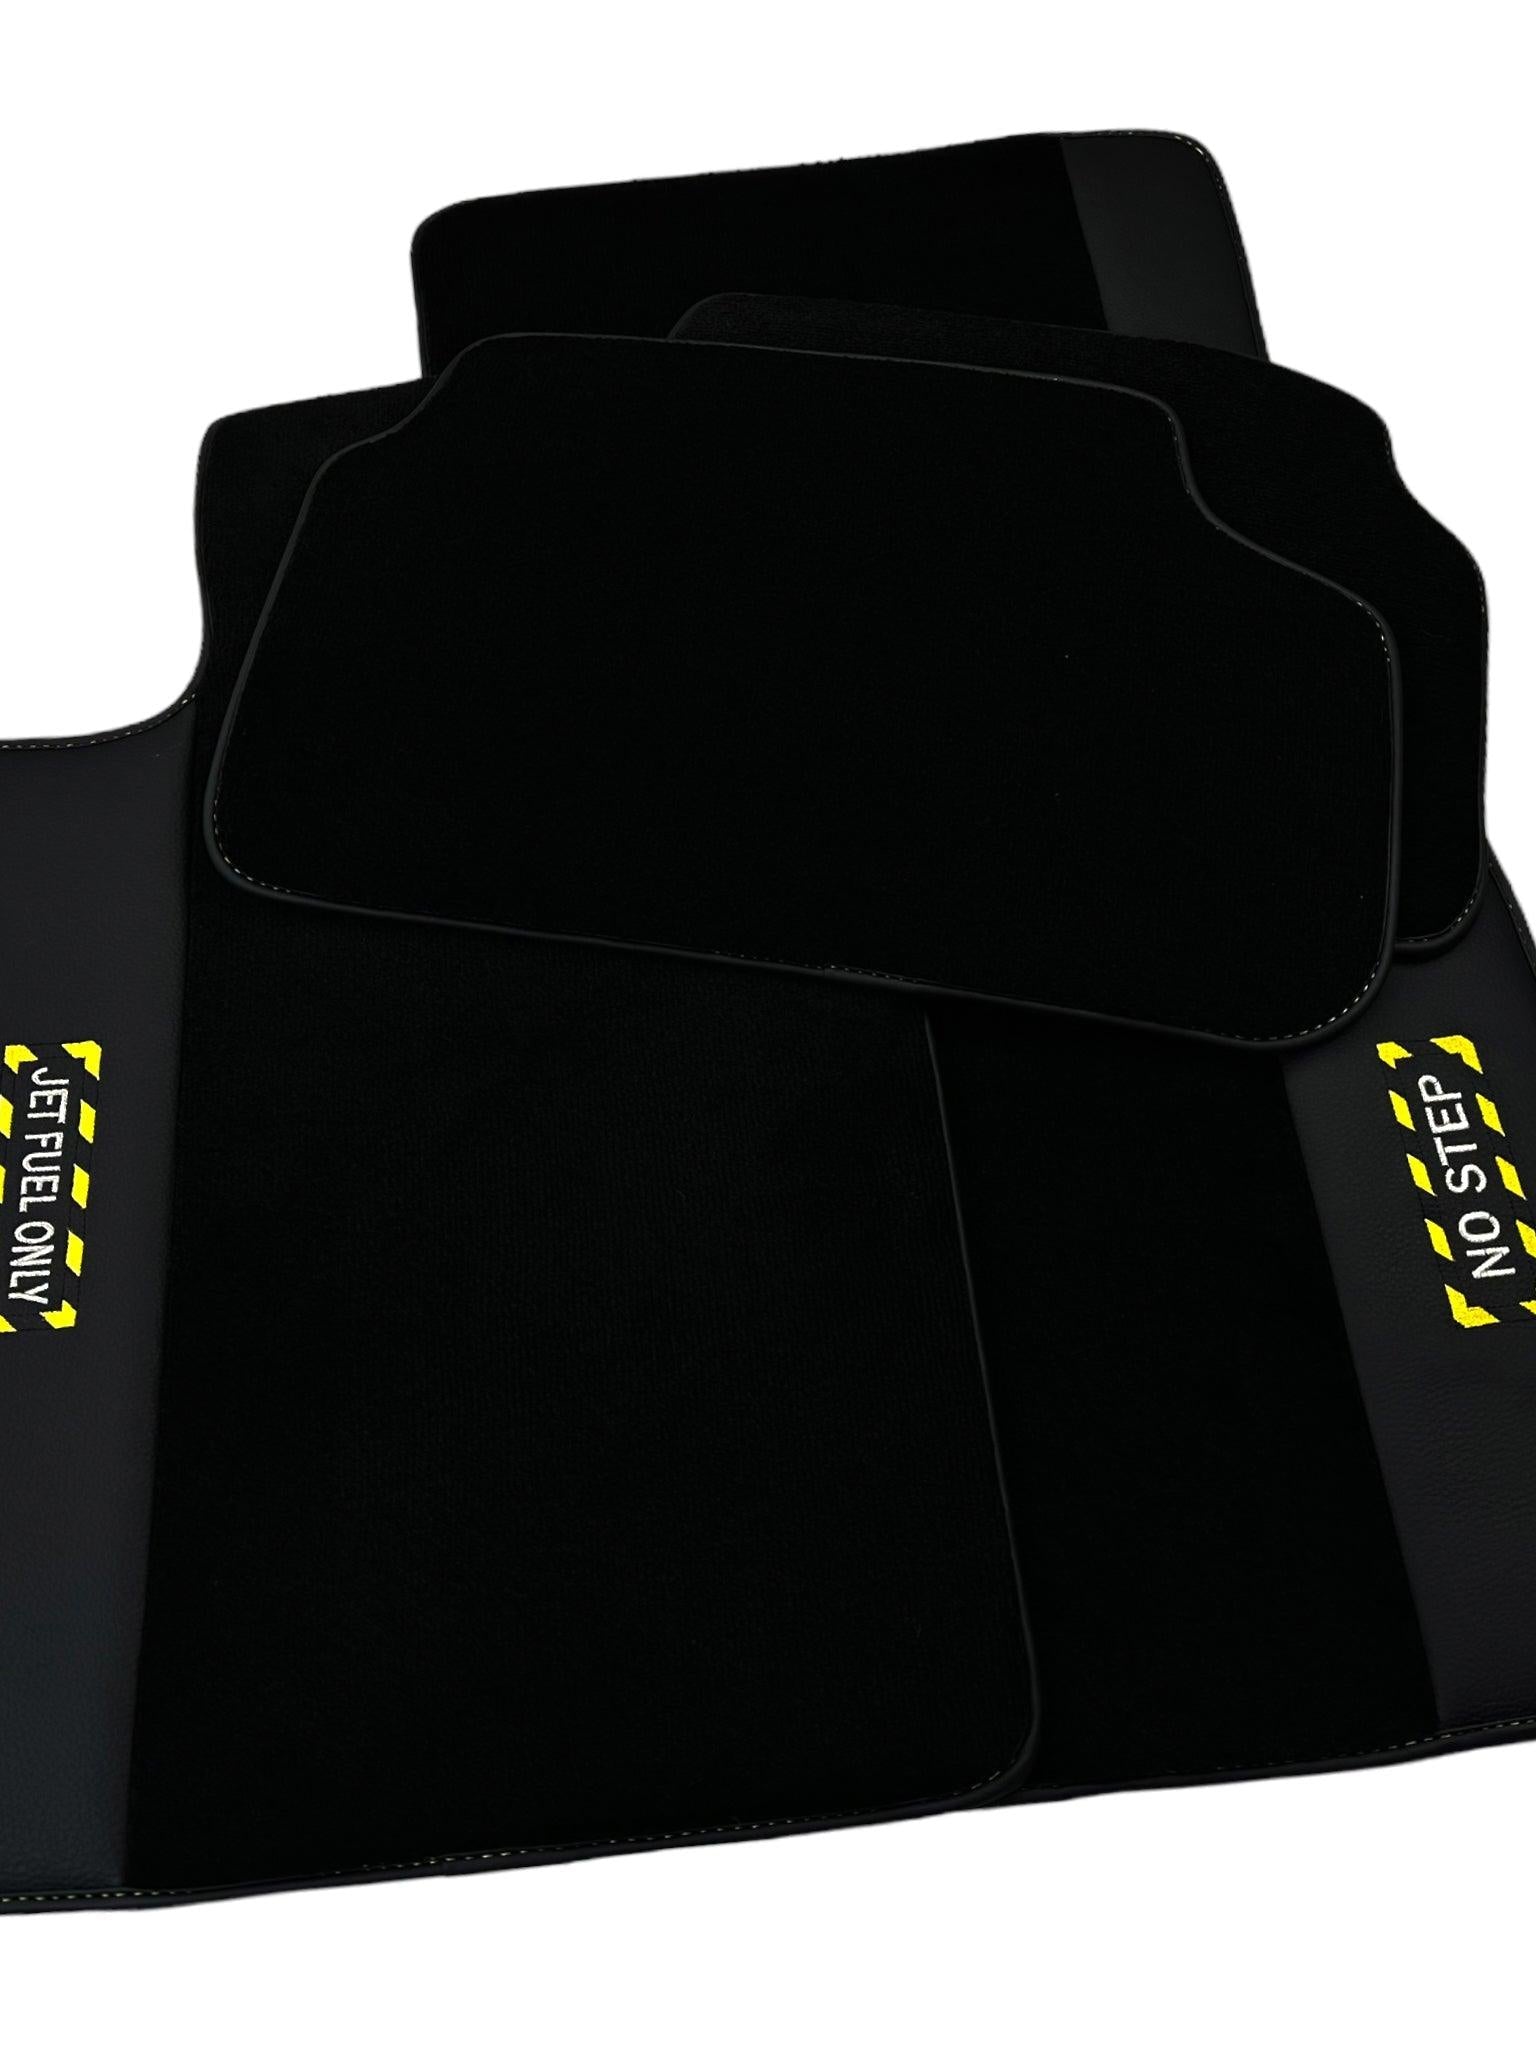 Black Floor Mats For BMW X6 Series F16 | Fighter Jet Edition - AutoWin